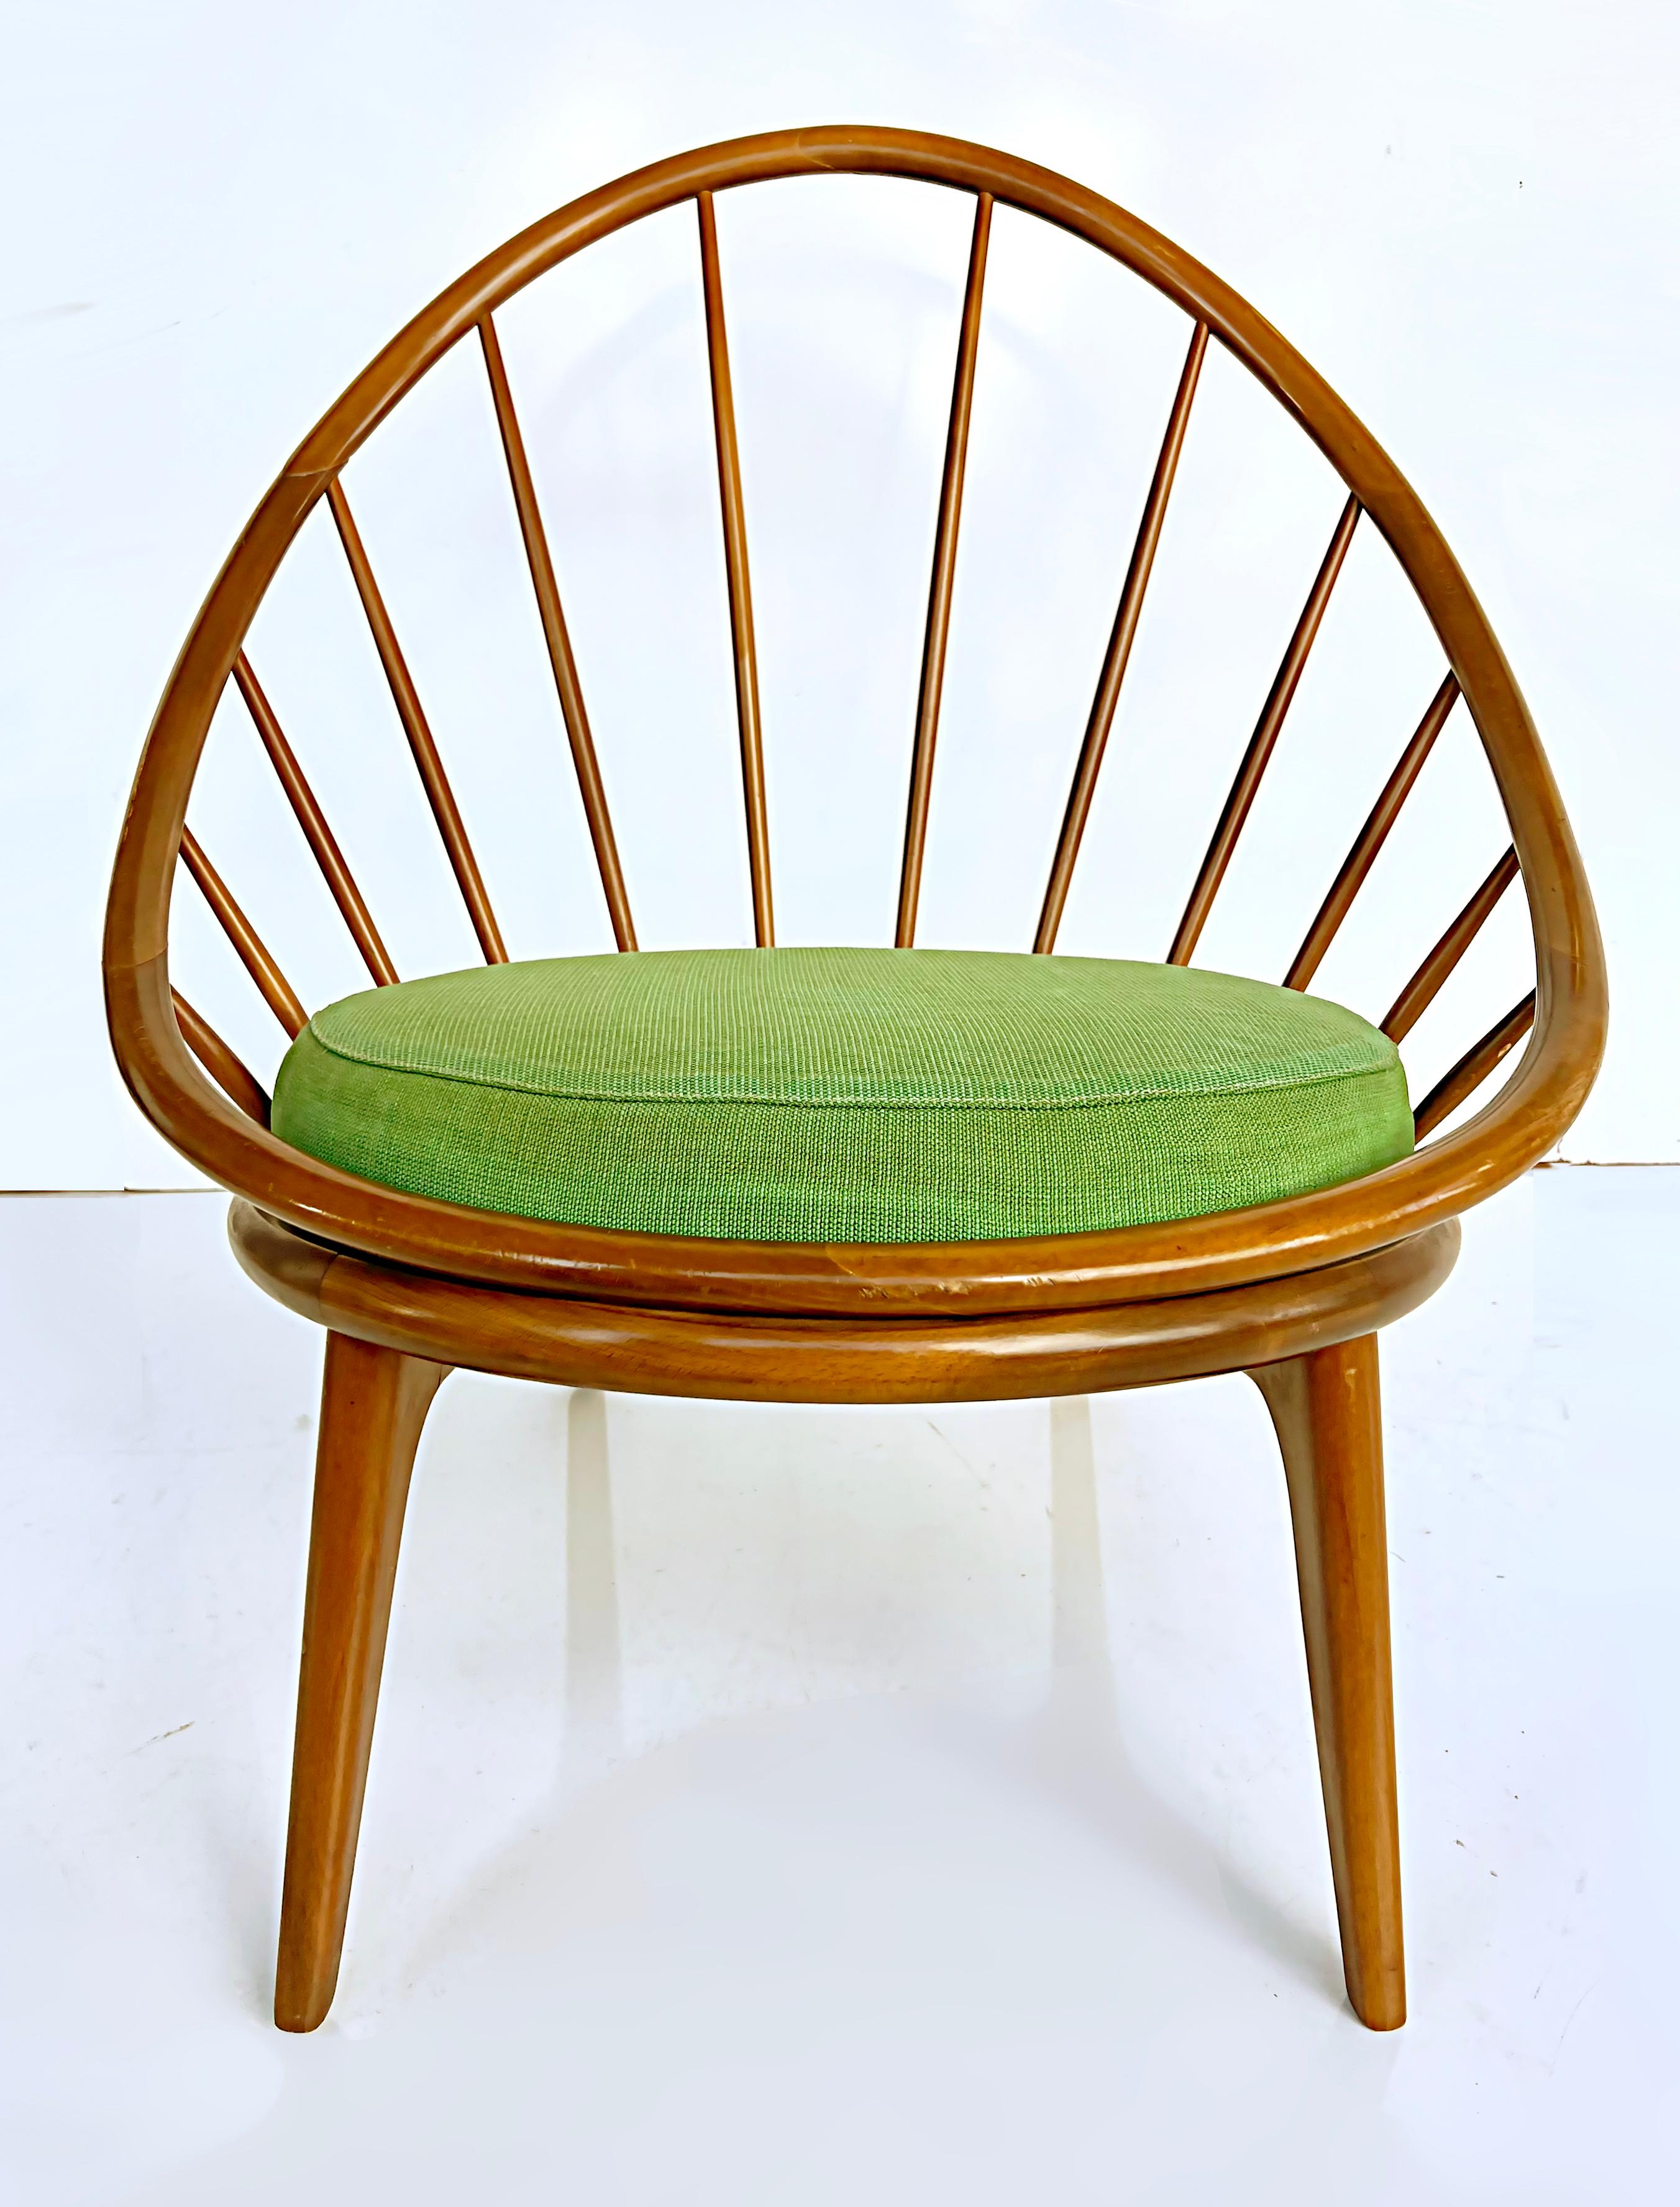 1950s Danish Modern Ib Kofod Larsen for Selig Hoop Chair with Seat Cushion

Offered for sale is a 1950s Danish Modern Ib Kofod Larsen hoop chair that is made in 
Denmark designed for Selig. The frame is walnut and a green seat cushion is provided.